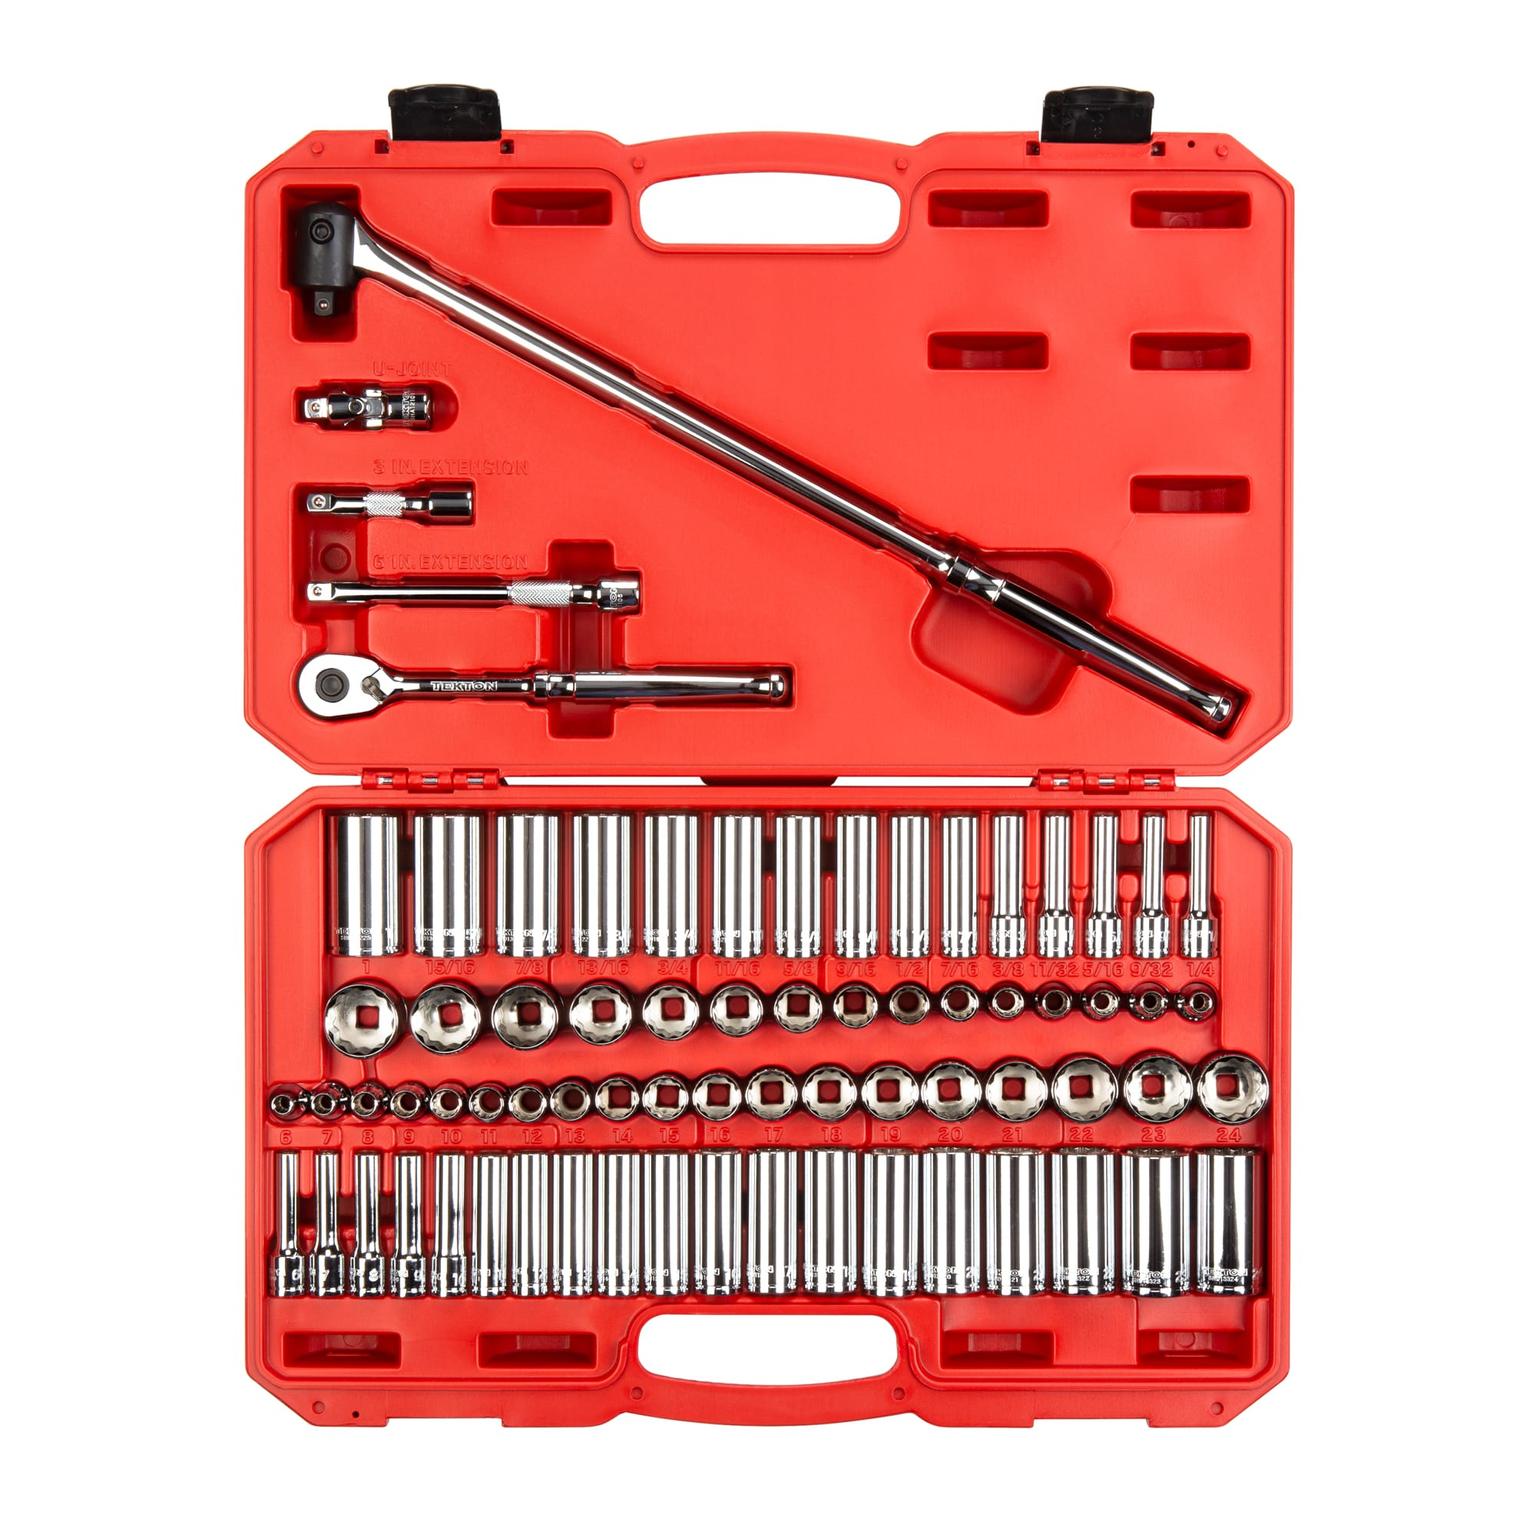 TEKTON SKT15312-D 3/8 Inch Drive 12-Point Socket and Ratchet Set, 73-Piece (1/4-1 in., 6-24 mm)